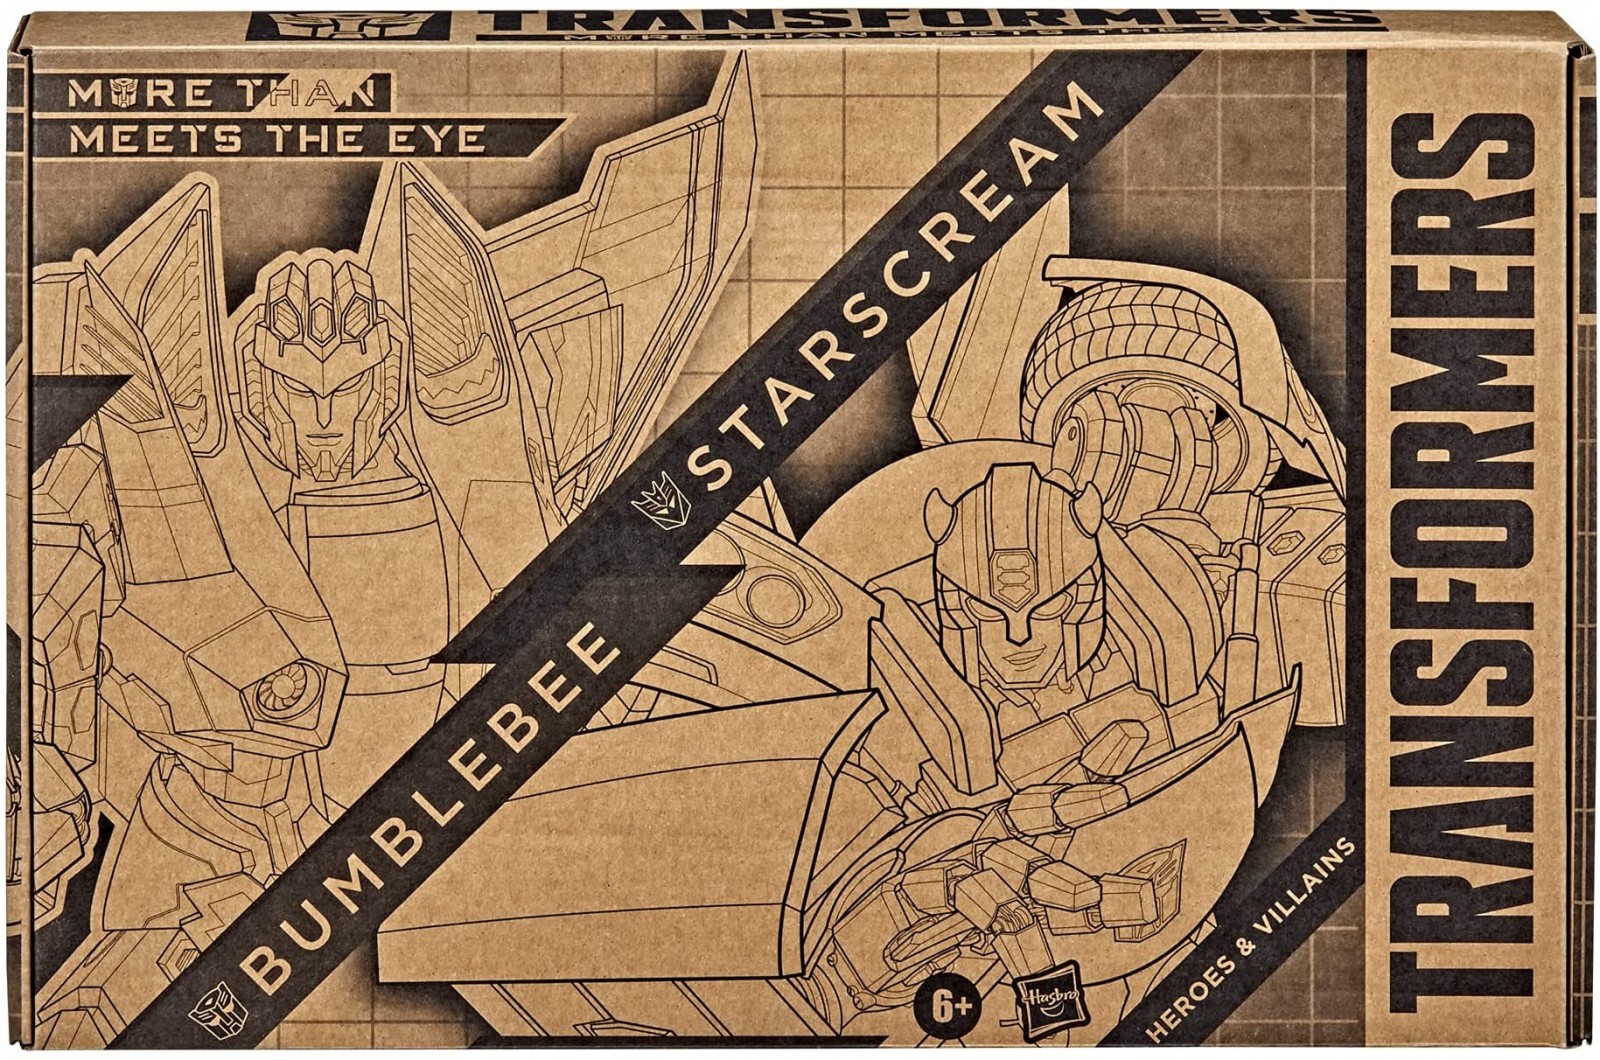 Transformers News: Amazon will have Transformers Cyber Battalion 2 packs Available Soon